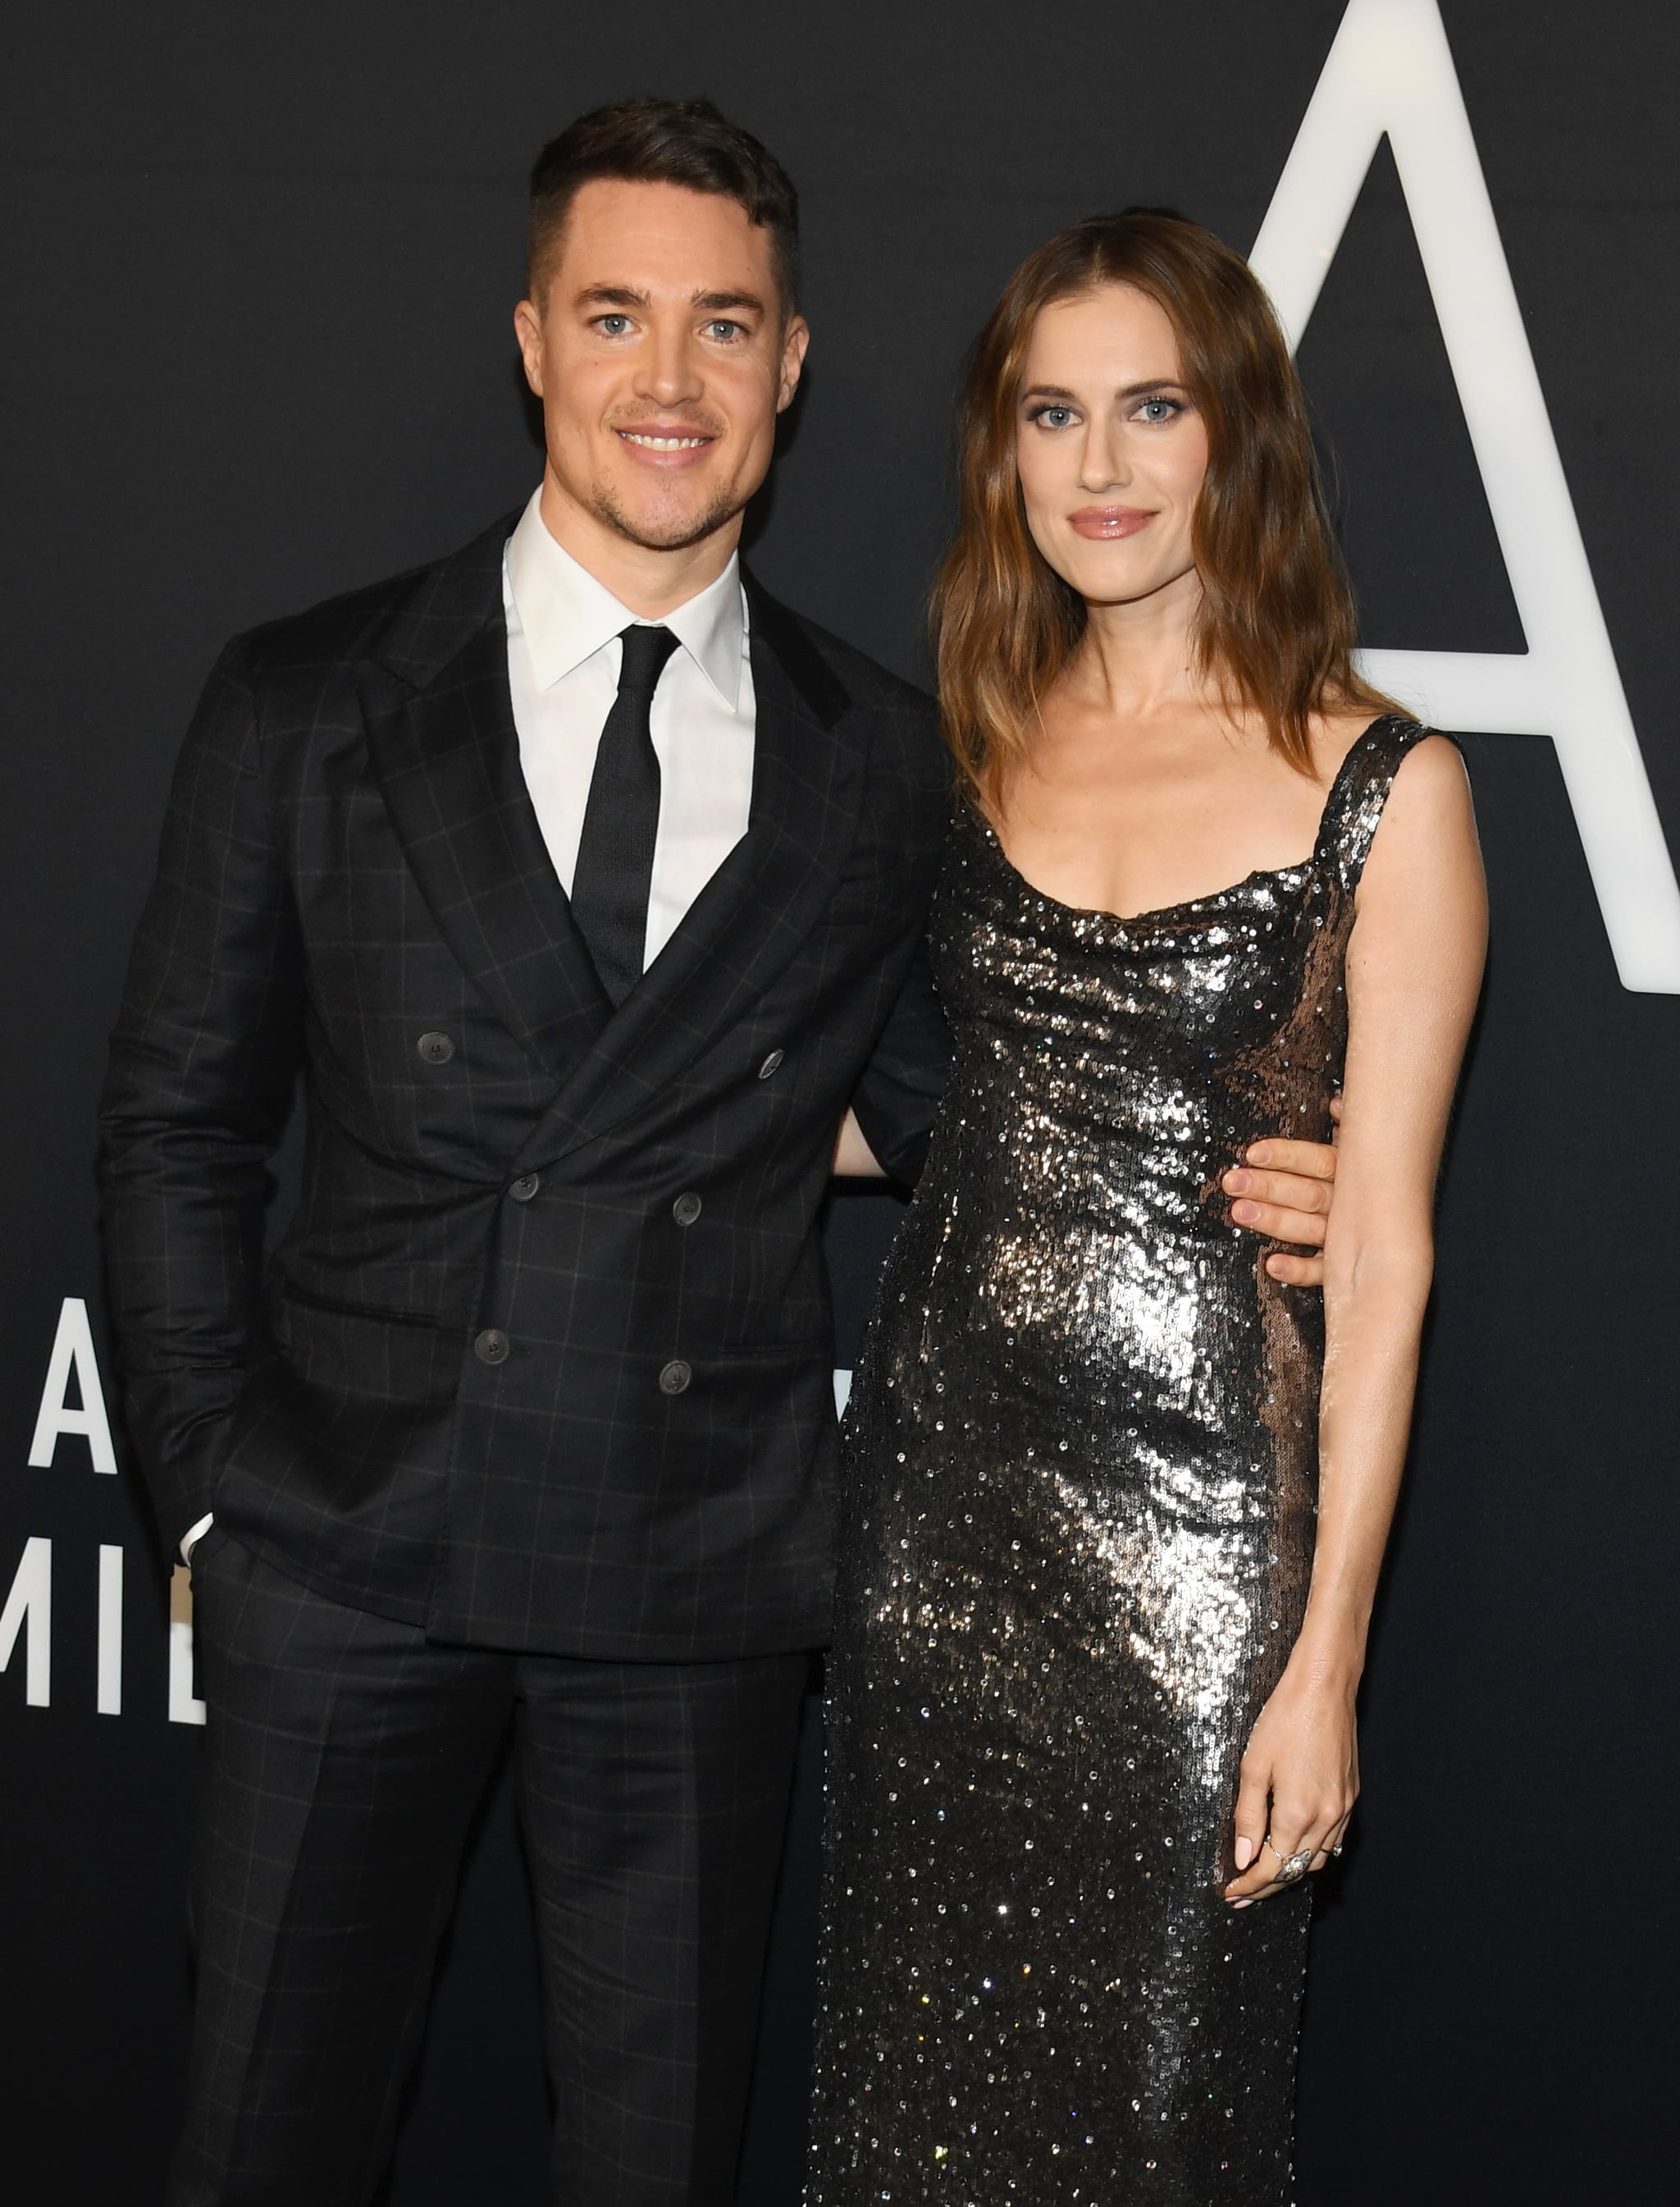 HOLLYWOOD, CALIFORNIA - DECEMBER 07: (L-R) Alexander Dreymon and Allison Williams attend Los Angeles Premiere Of Universal Pictures' 